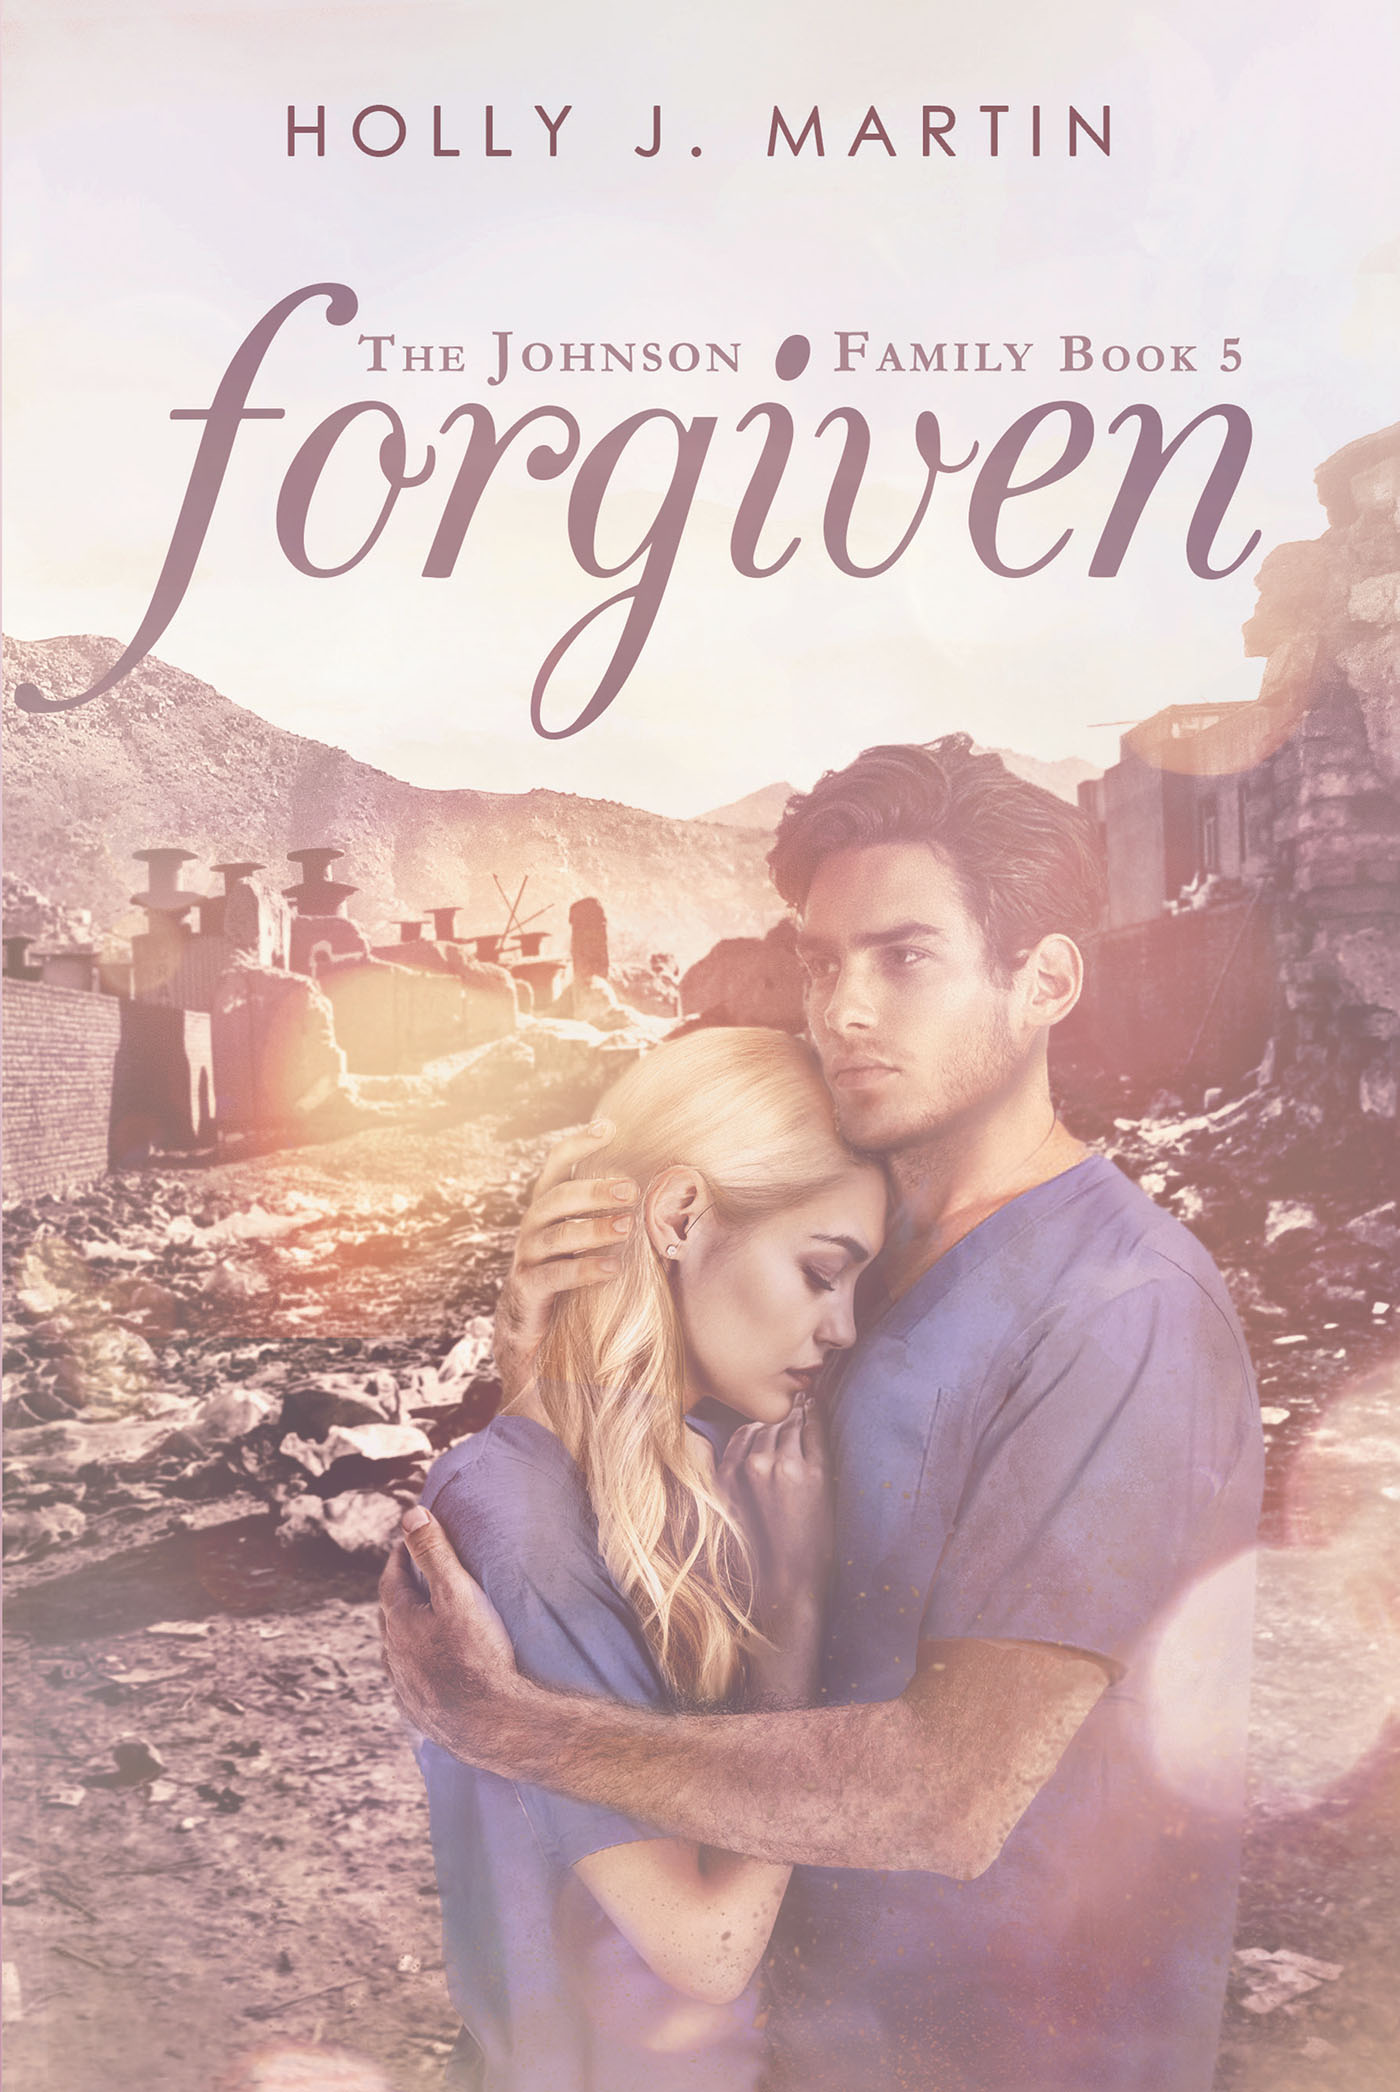 Forgiven Cover Image